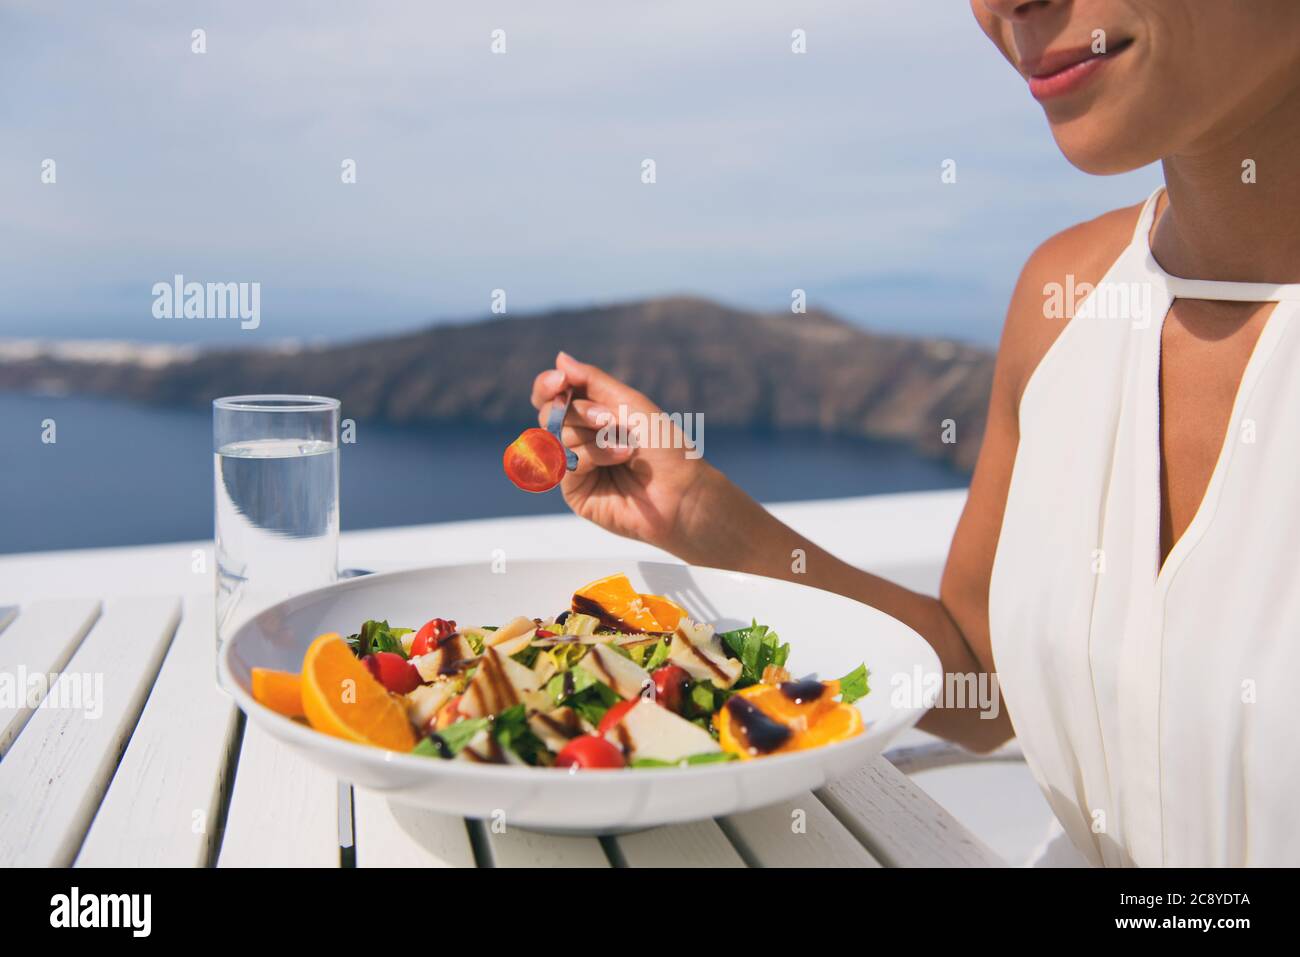 Restaurant woman eating salad luxury europe travel Santorini vacation. Healthy lifestyle people relaxing on Greece holidays Stock Photo